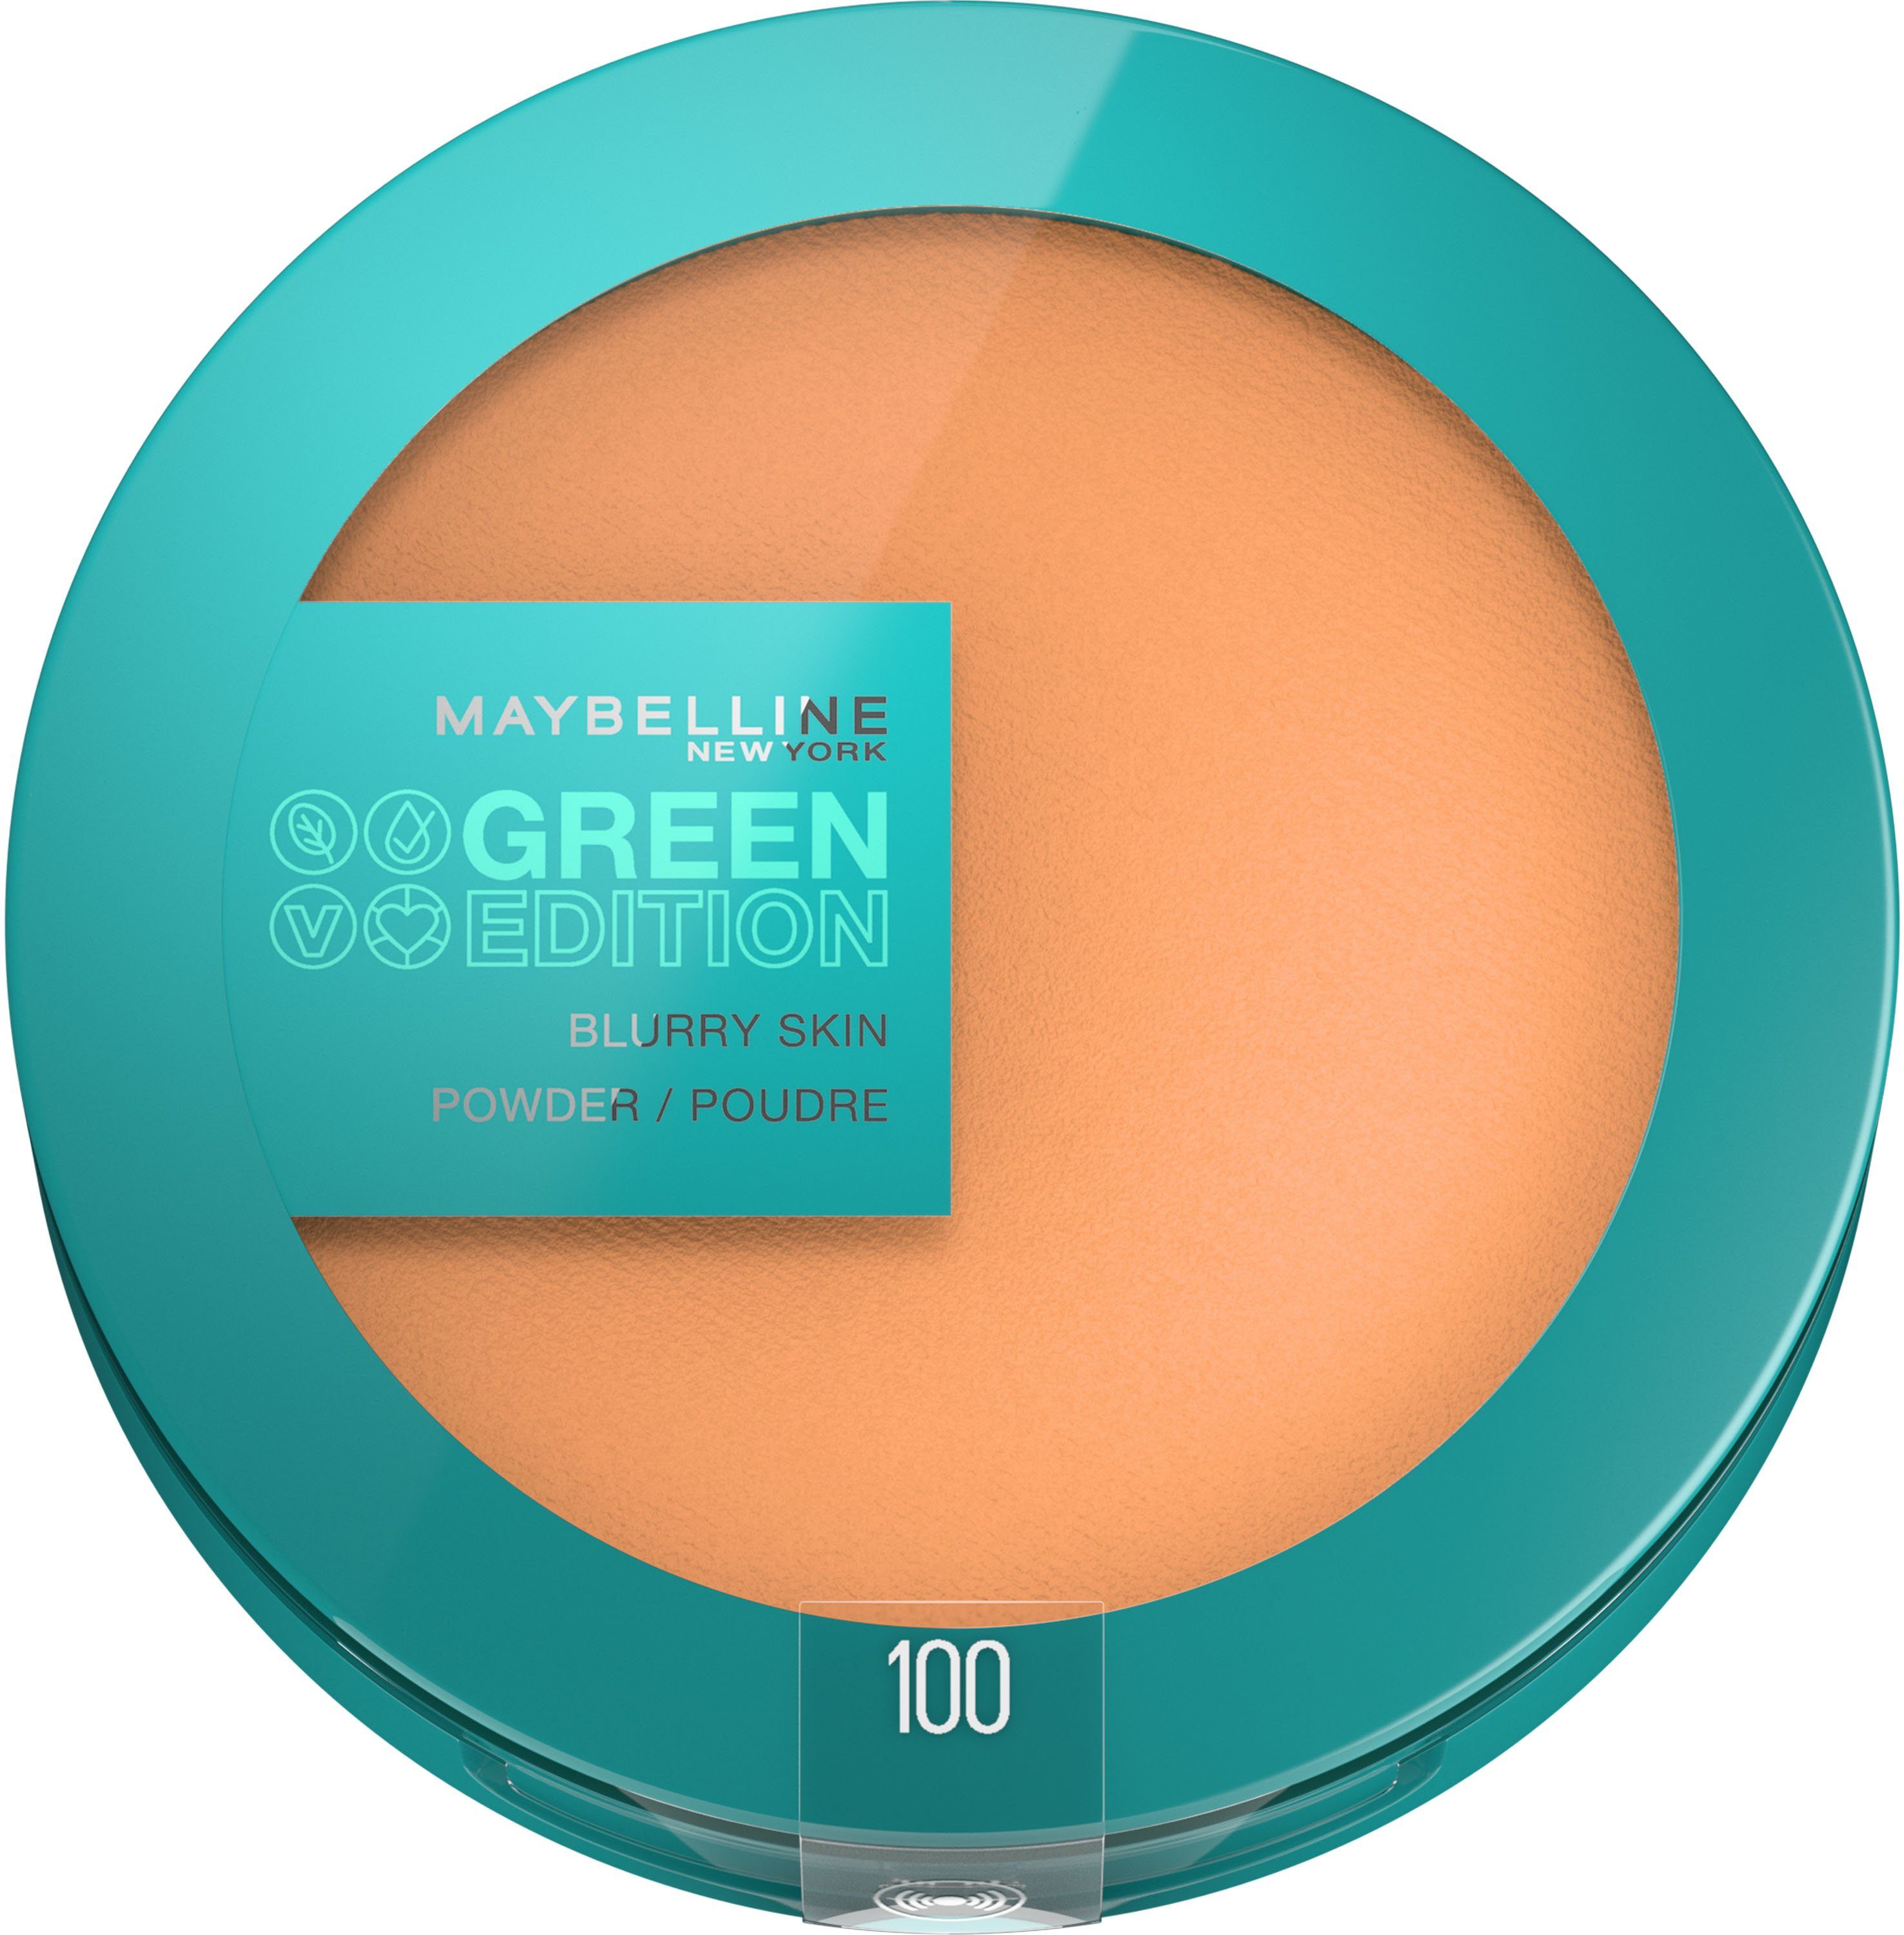 YORK GREEN Puder Puder MAYBELLINE ED POWDER NEW Edition 100 Green